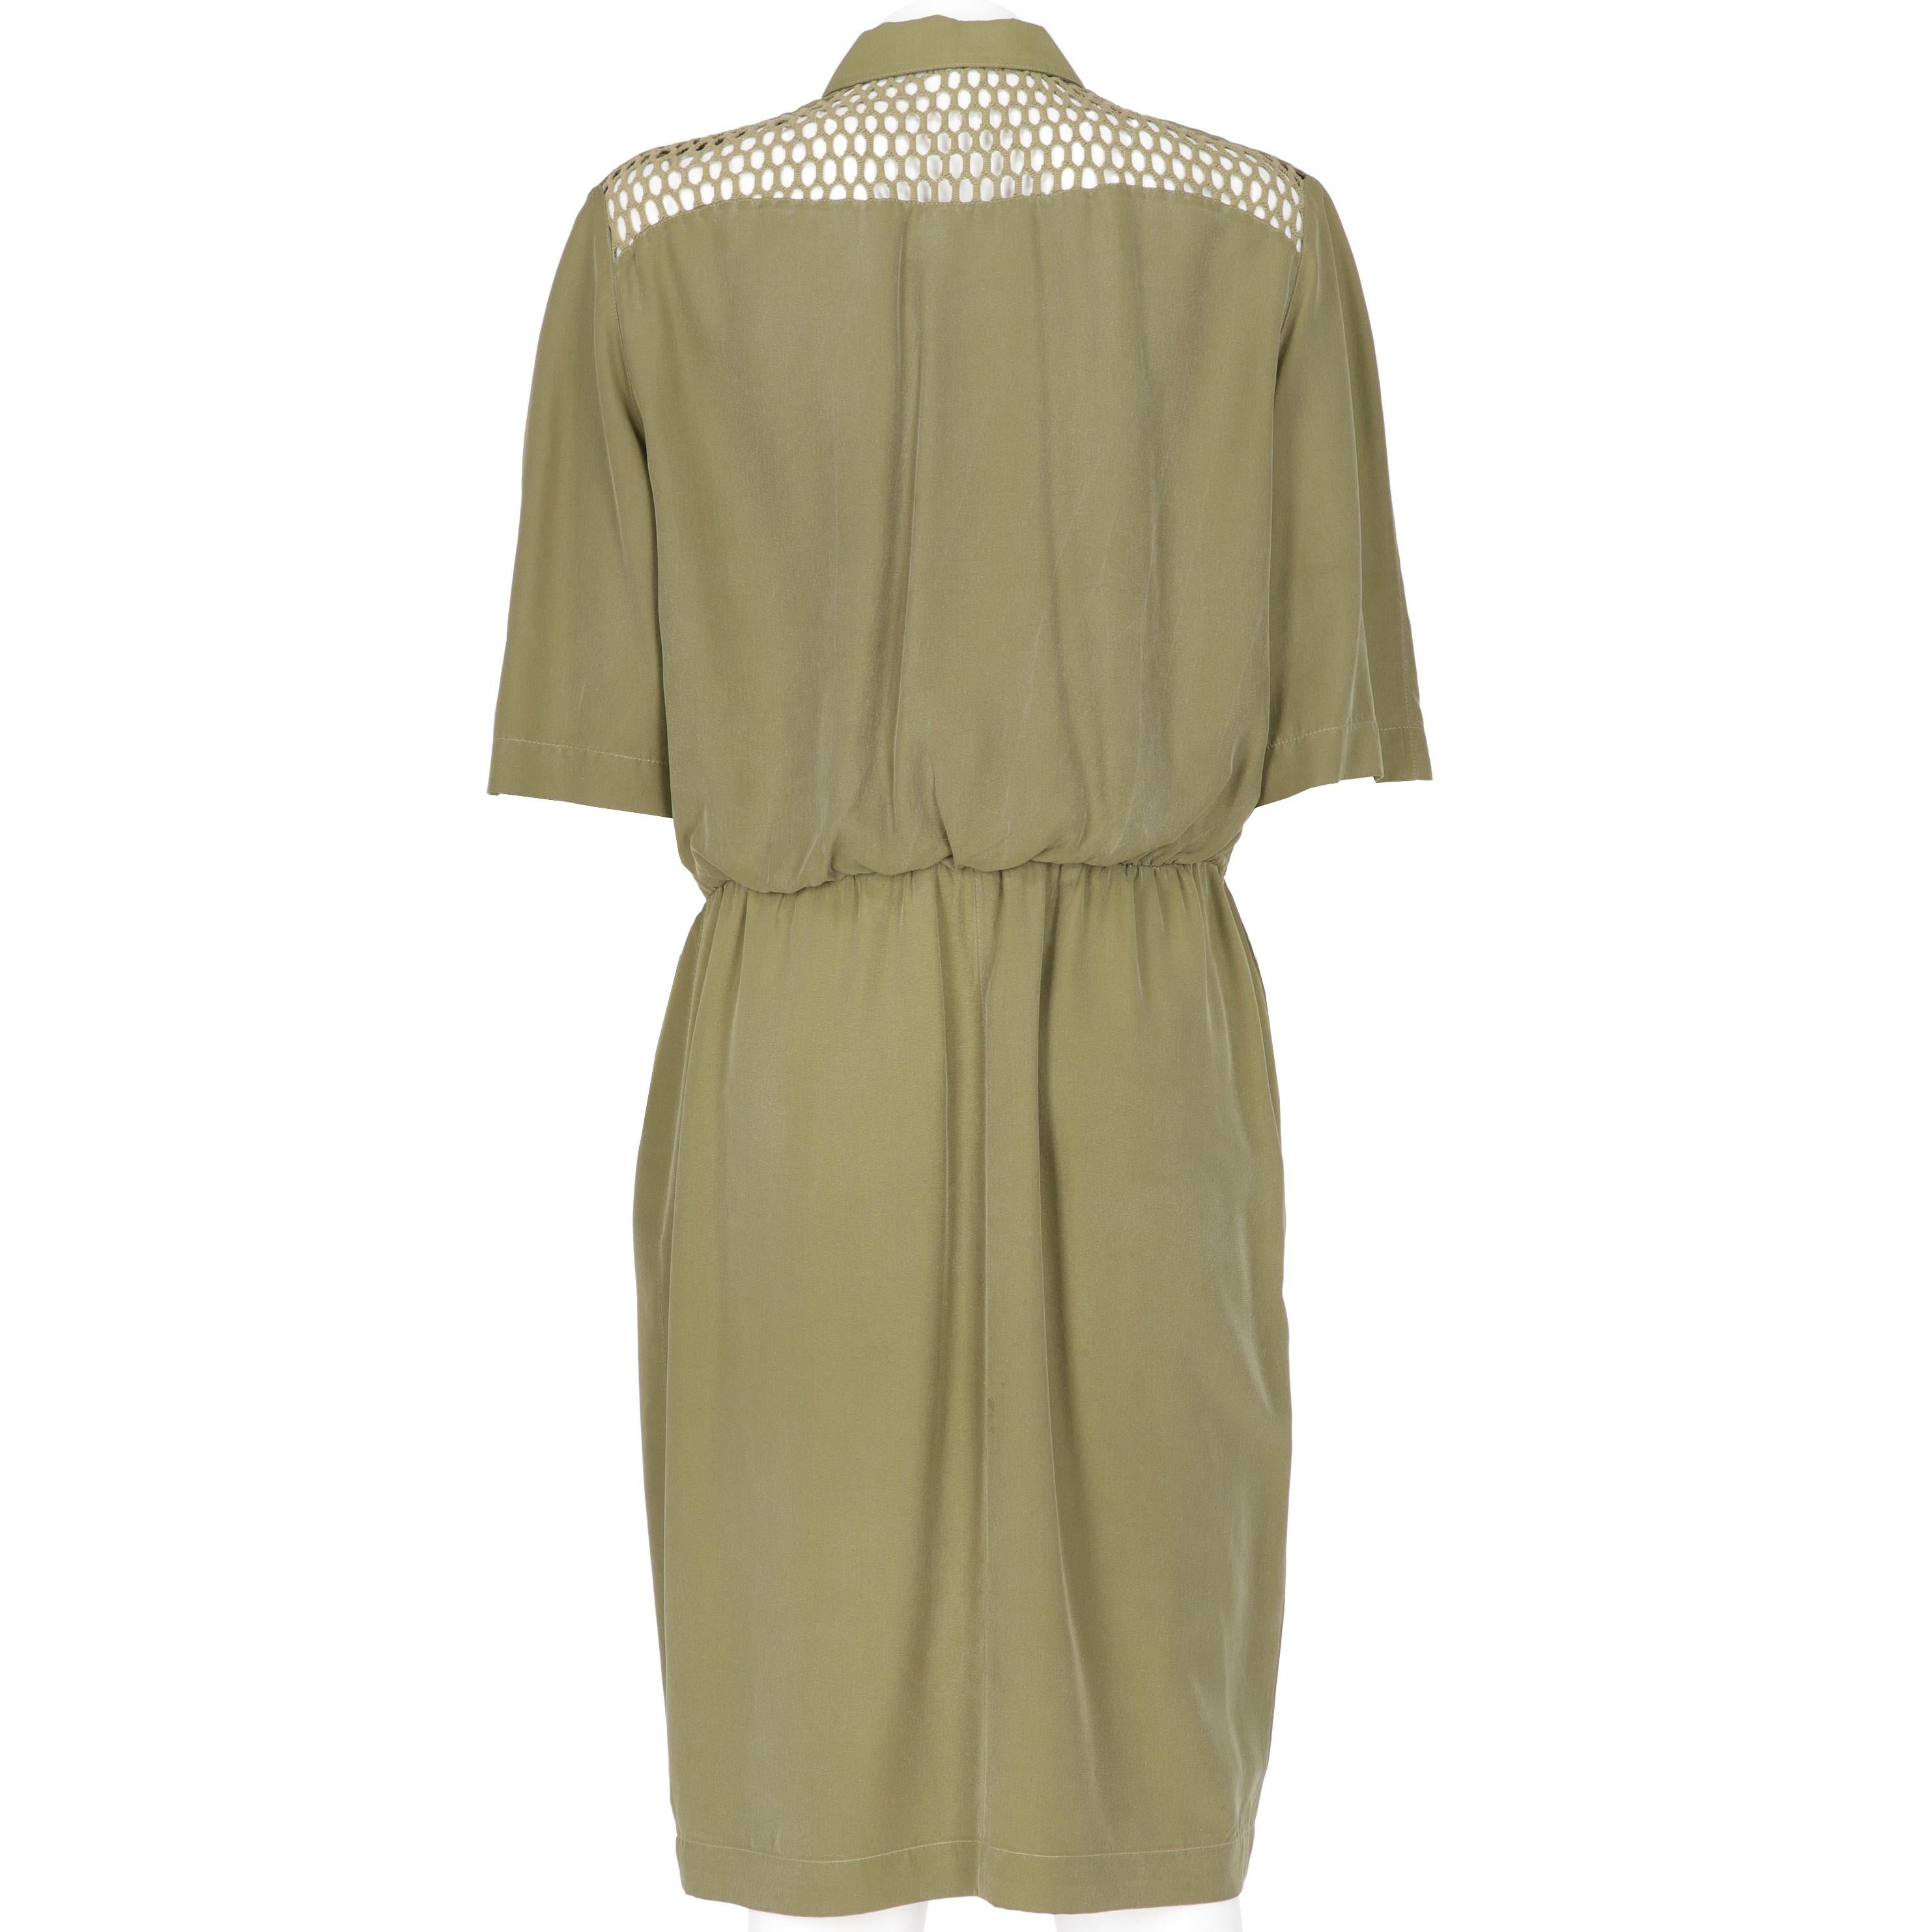 Thierry Mugler military green silk long chemiser dress, shaped collar with round tips and metal press studs full-length fastening, decorated with tone on tone green plastic small cone. The soft bodice features a refined knitted cotton net upper part